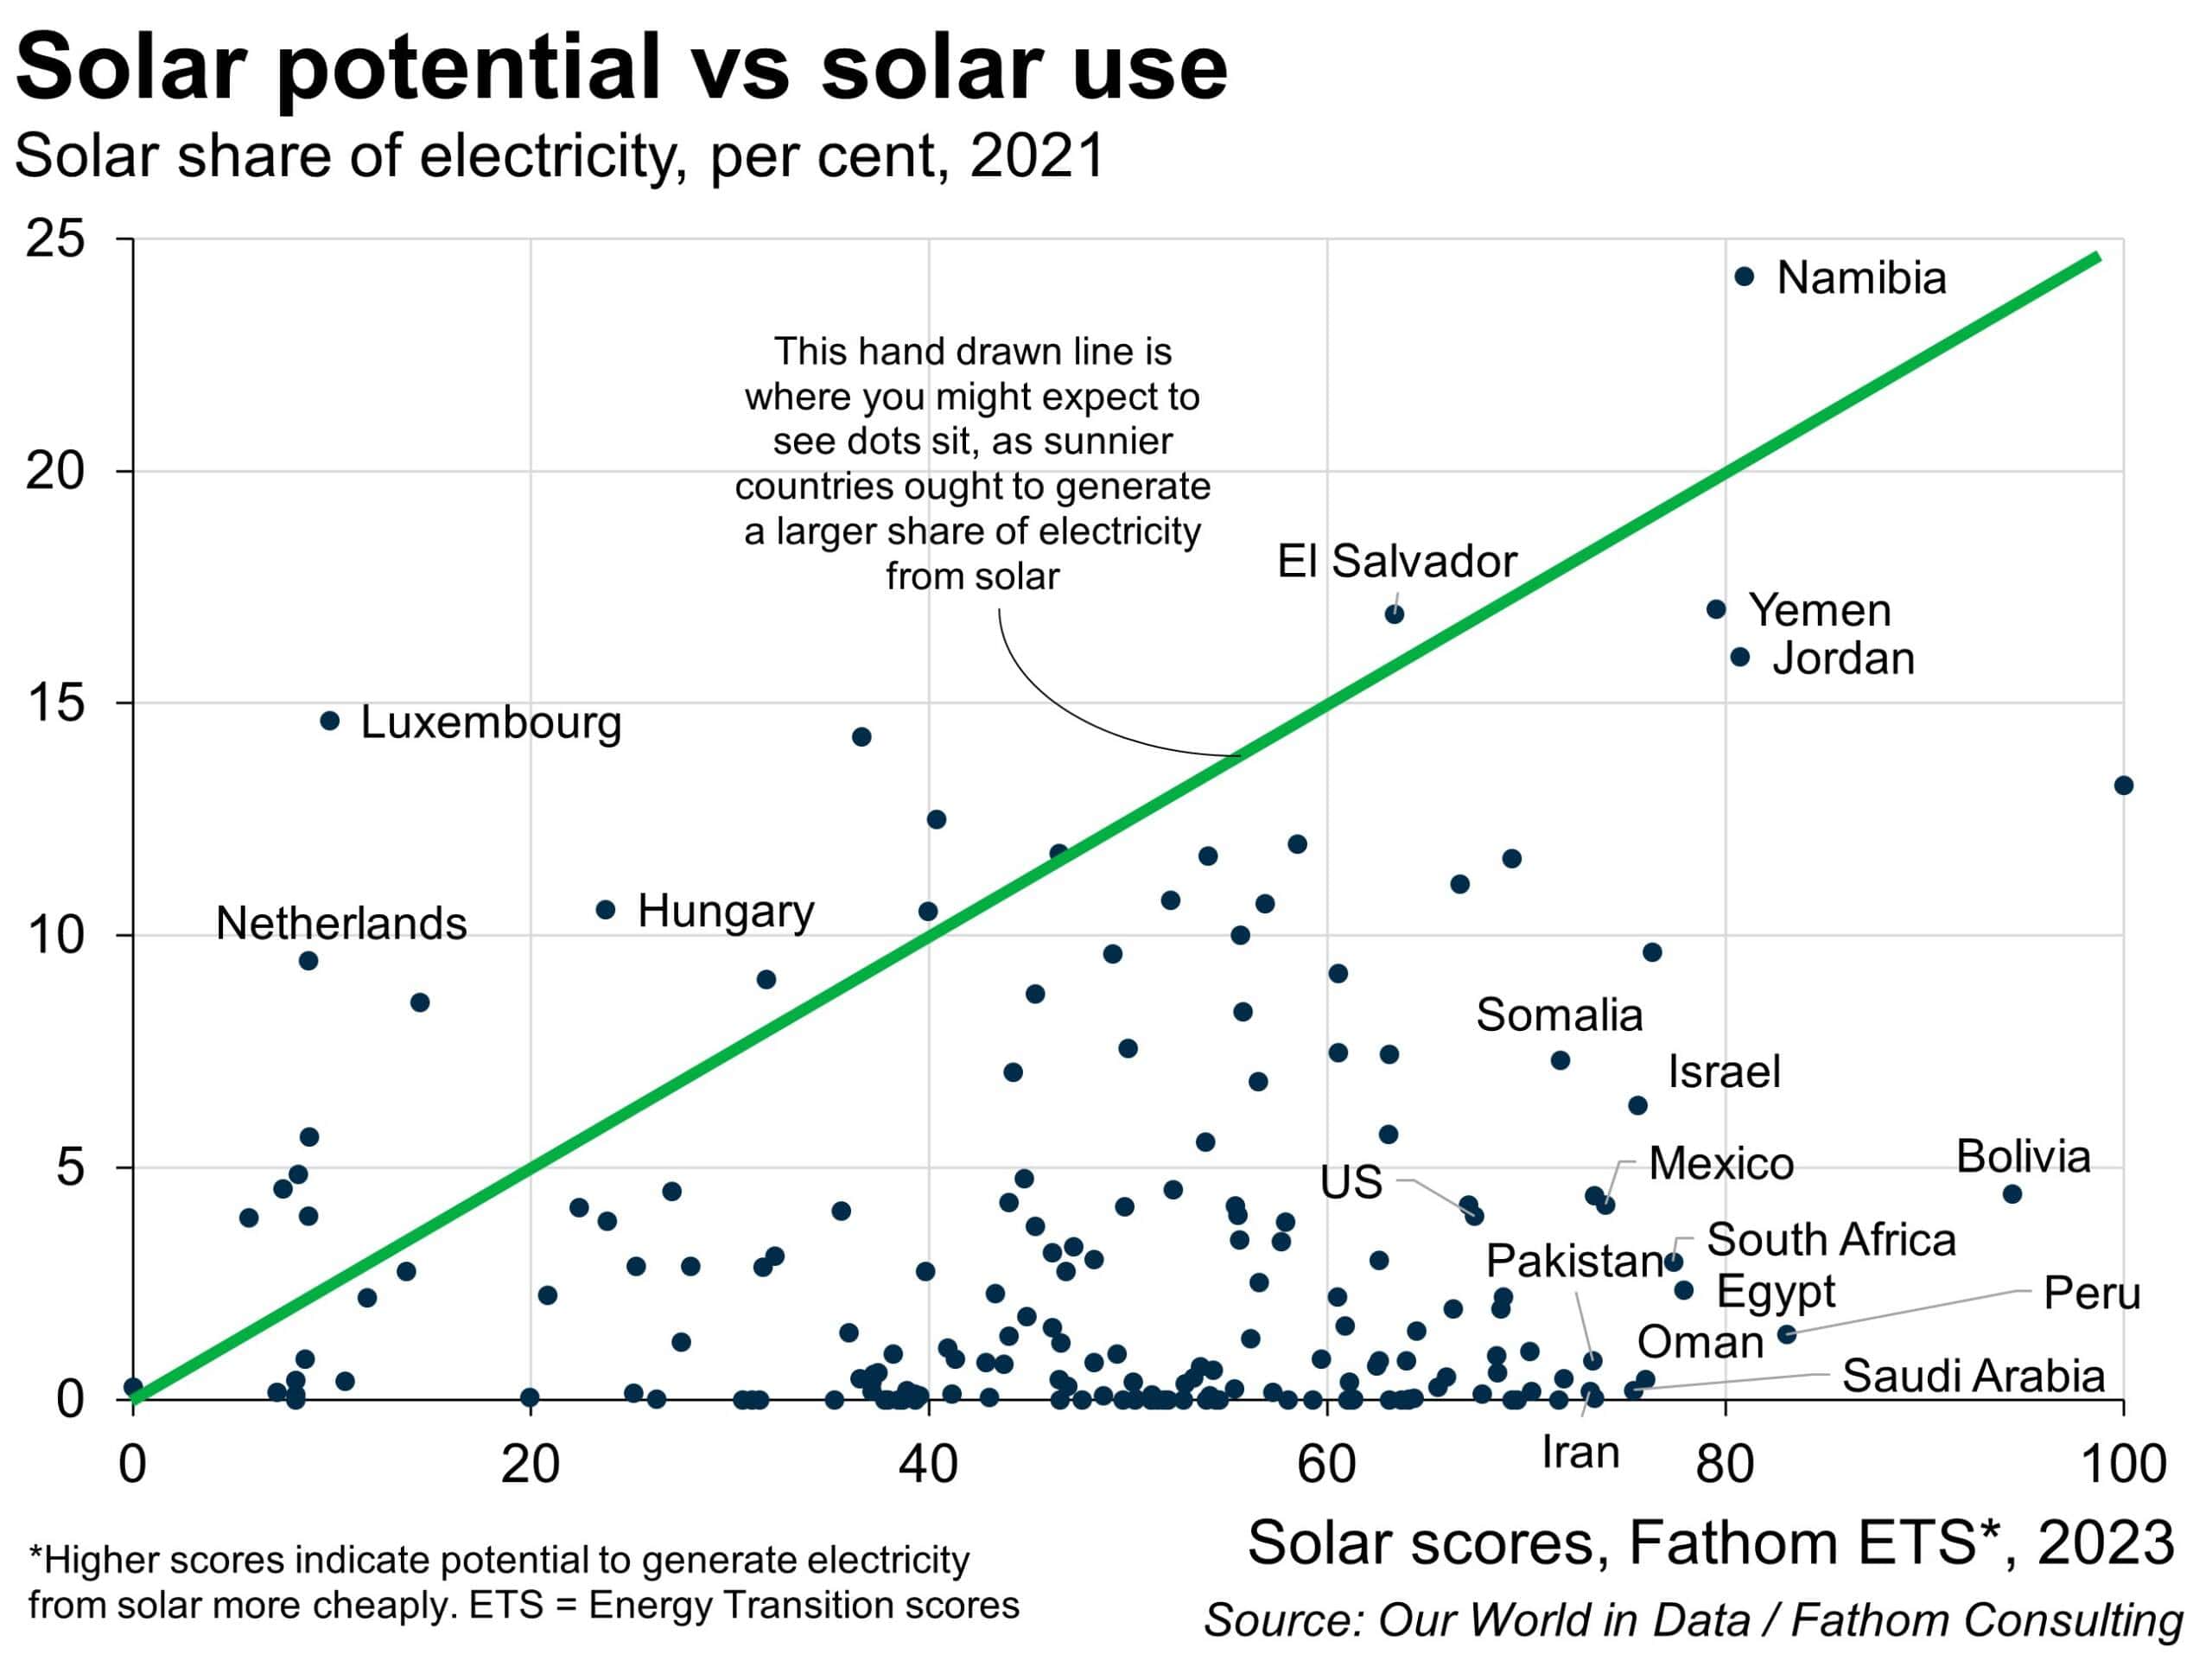 Solar potential versus solar use, as per cent, Solar share of Electricity, for 2021 